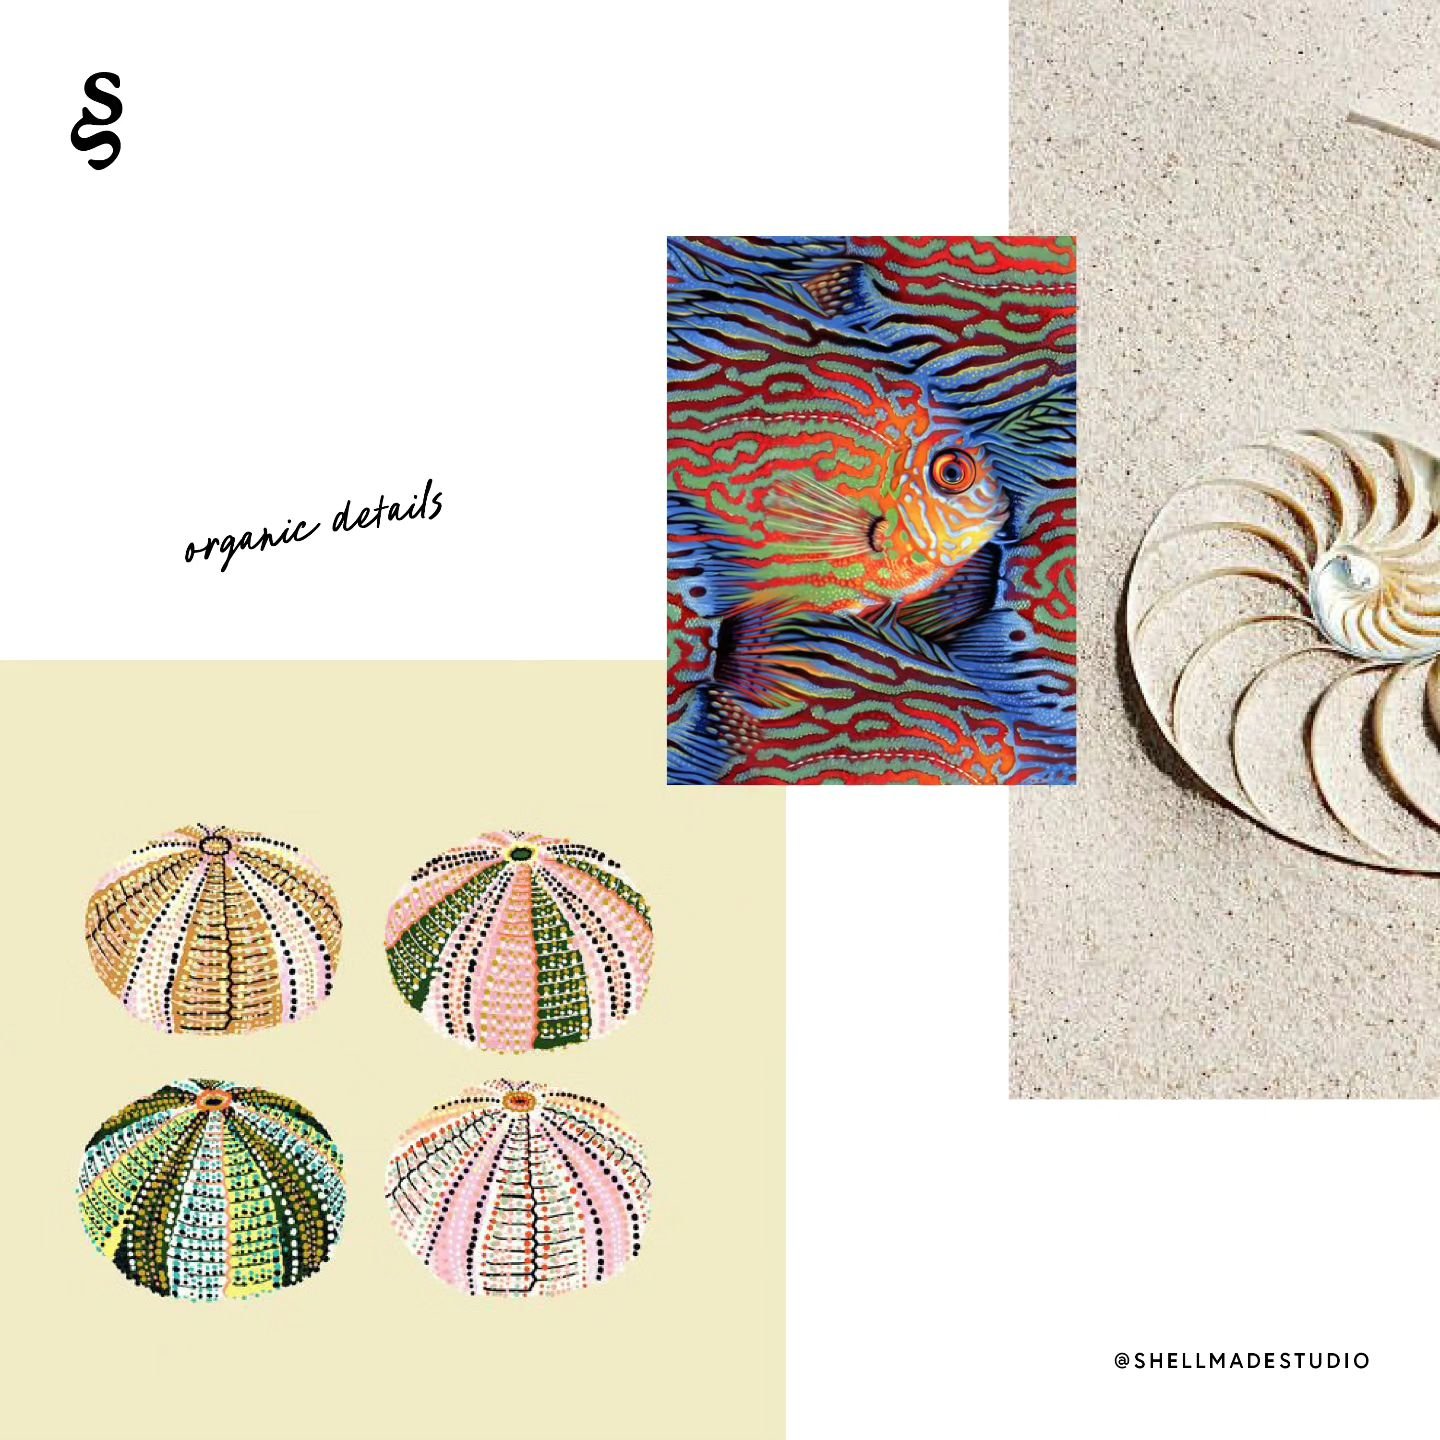 Moodboarding today to develop some directions for the shellmade surface pattern collection. I can tell already that it is going to be vibrant with lots of striking contrast.
 
This direction is from my childhood memories spent near the ocean searchin